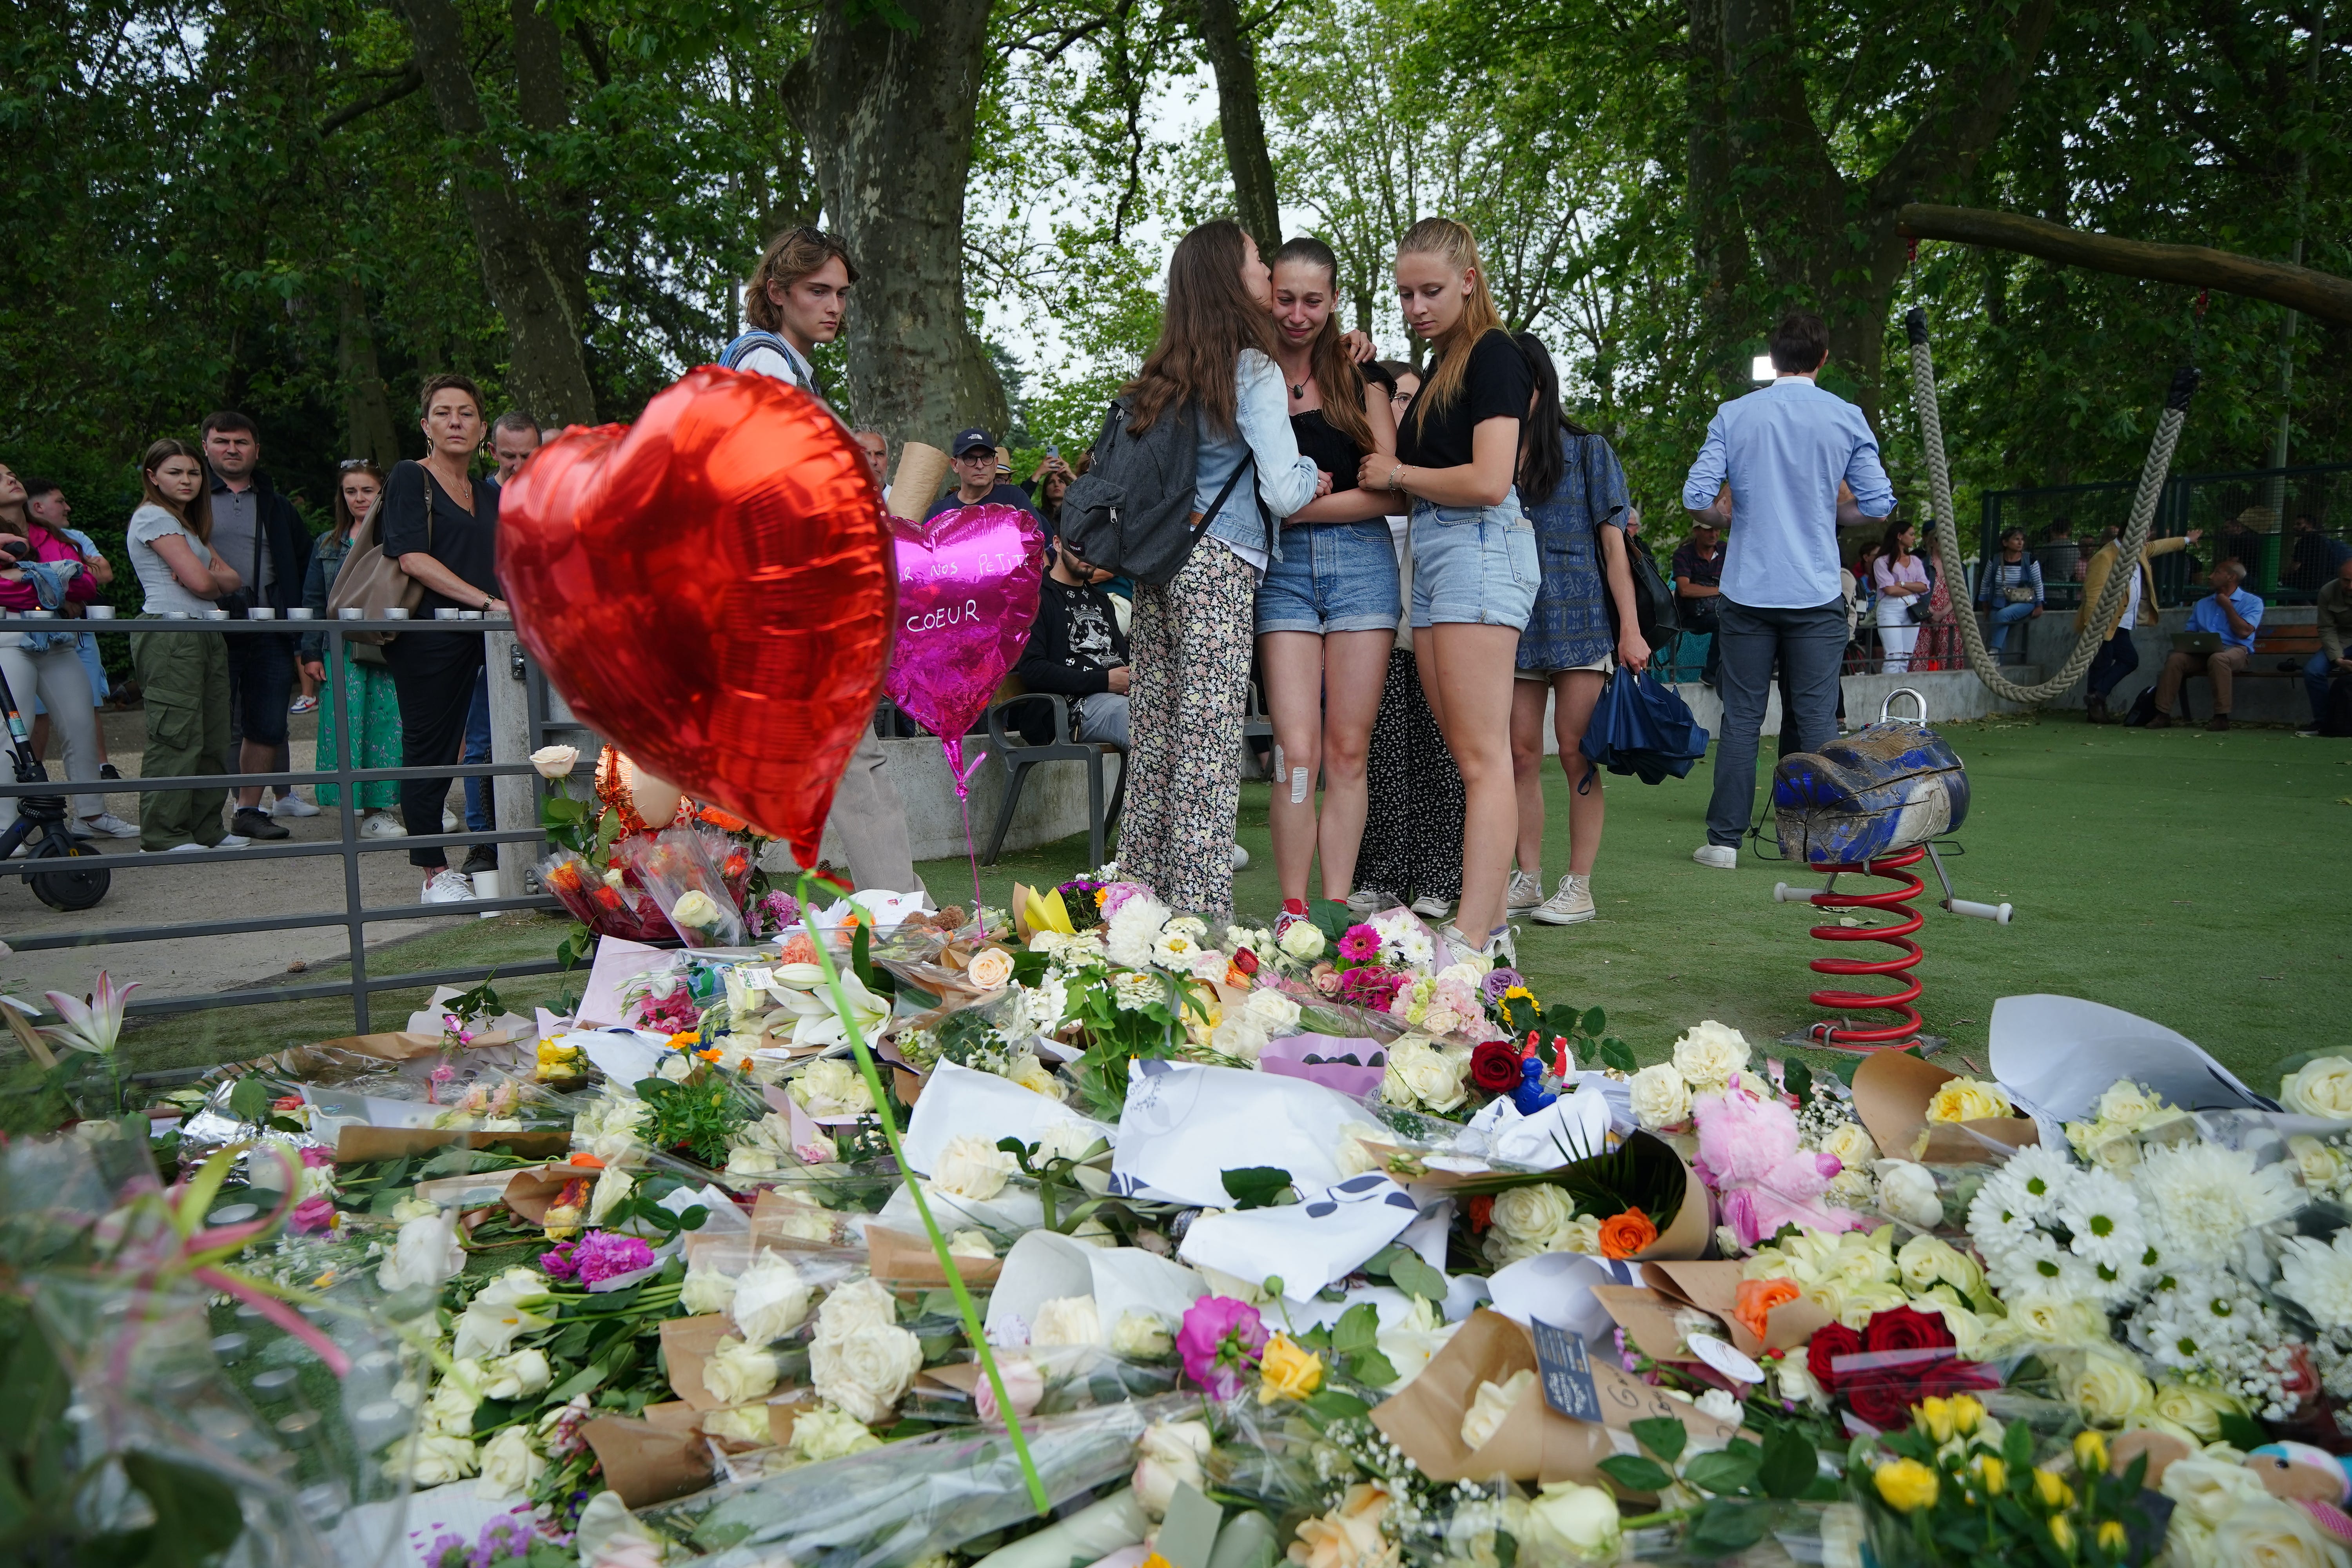 Tributes left near the scene at a lakeside park in Annecy, France, following a knife attack